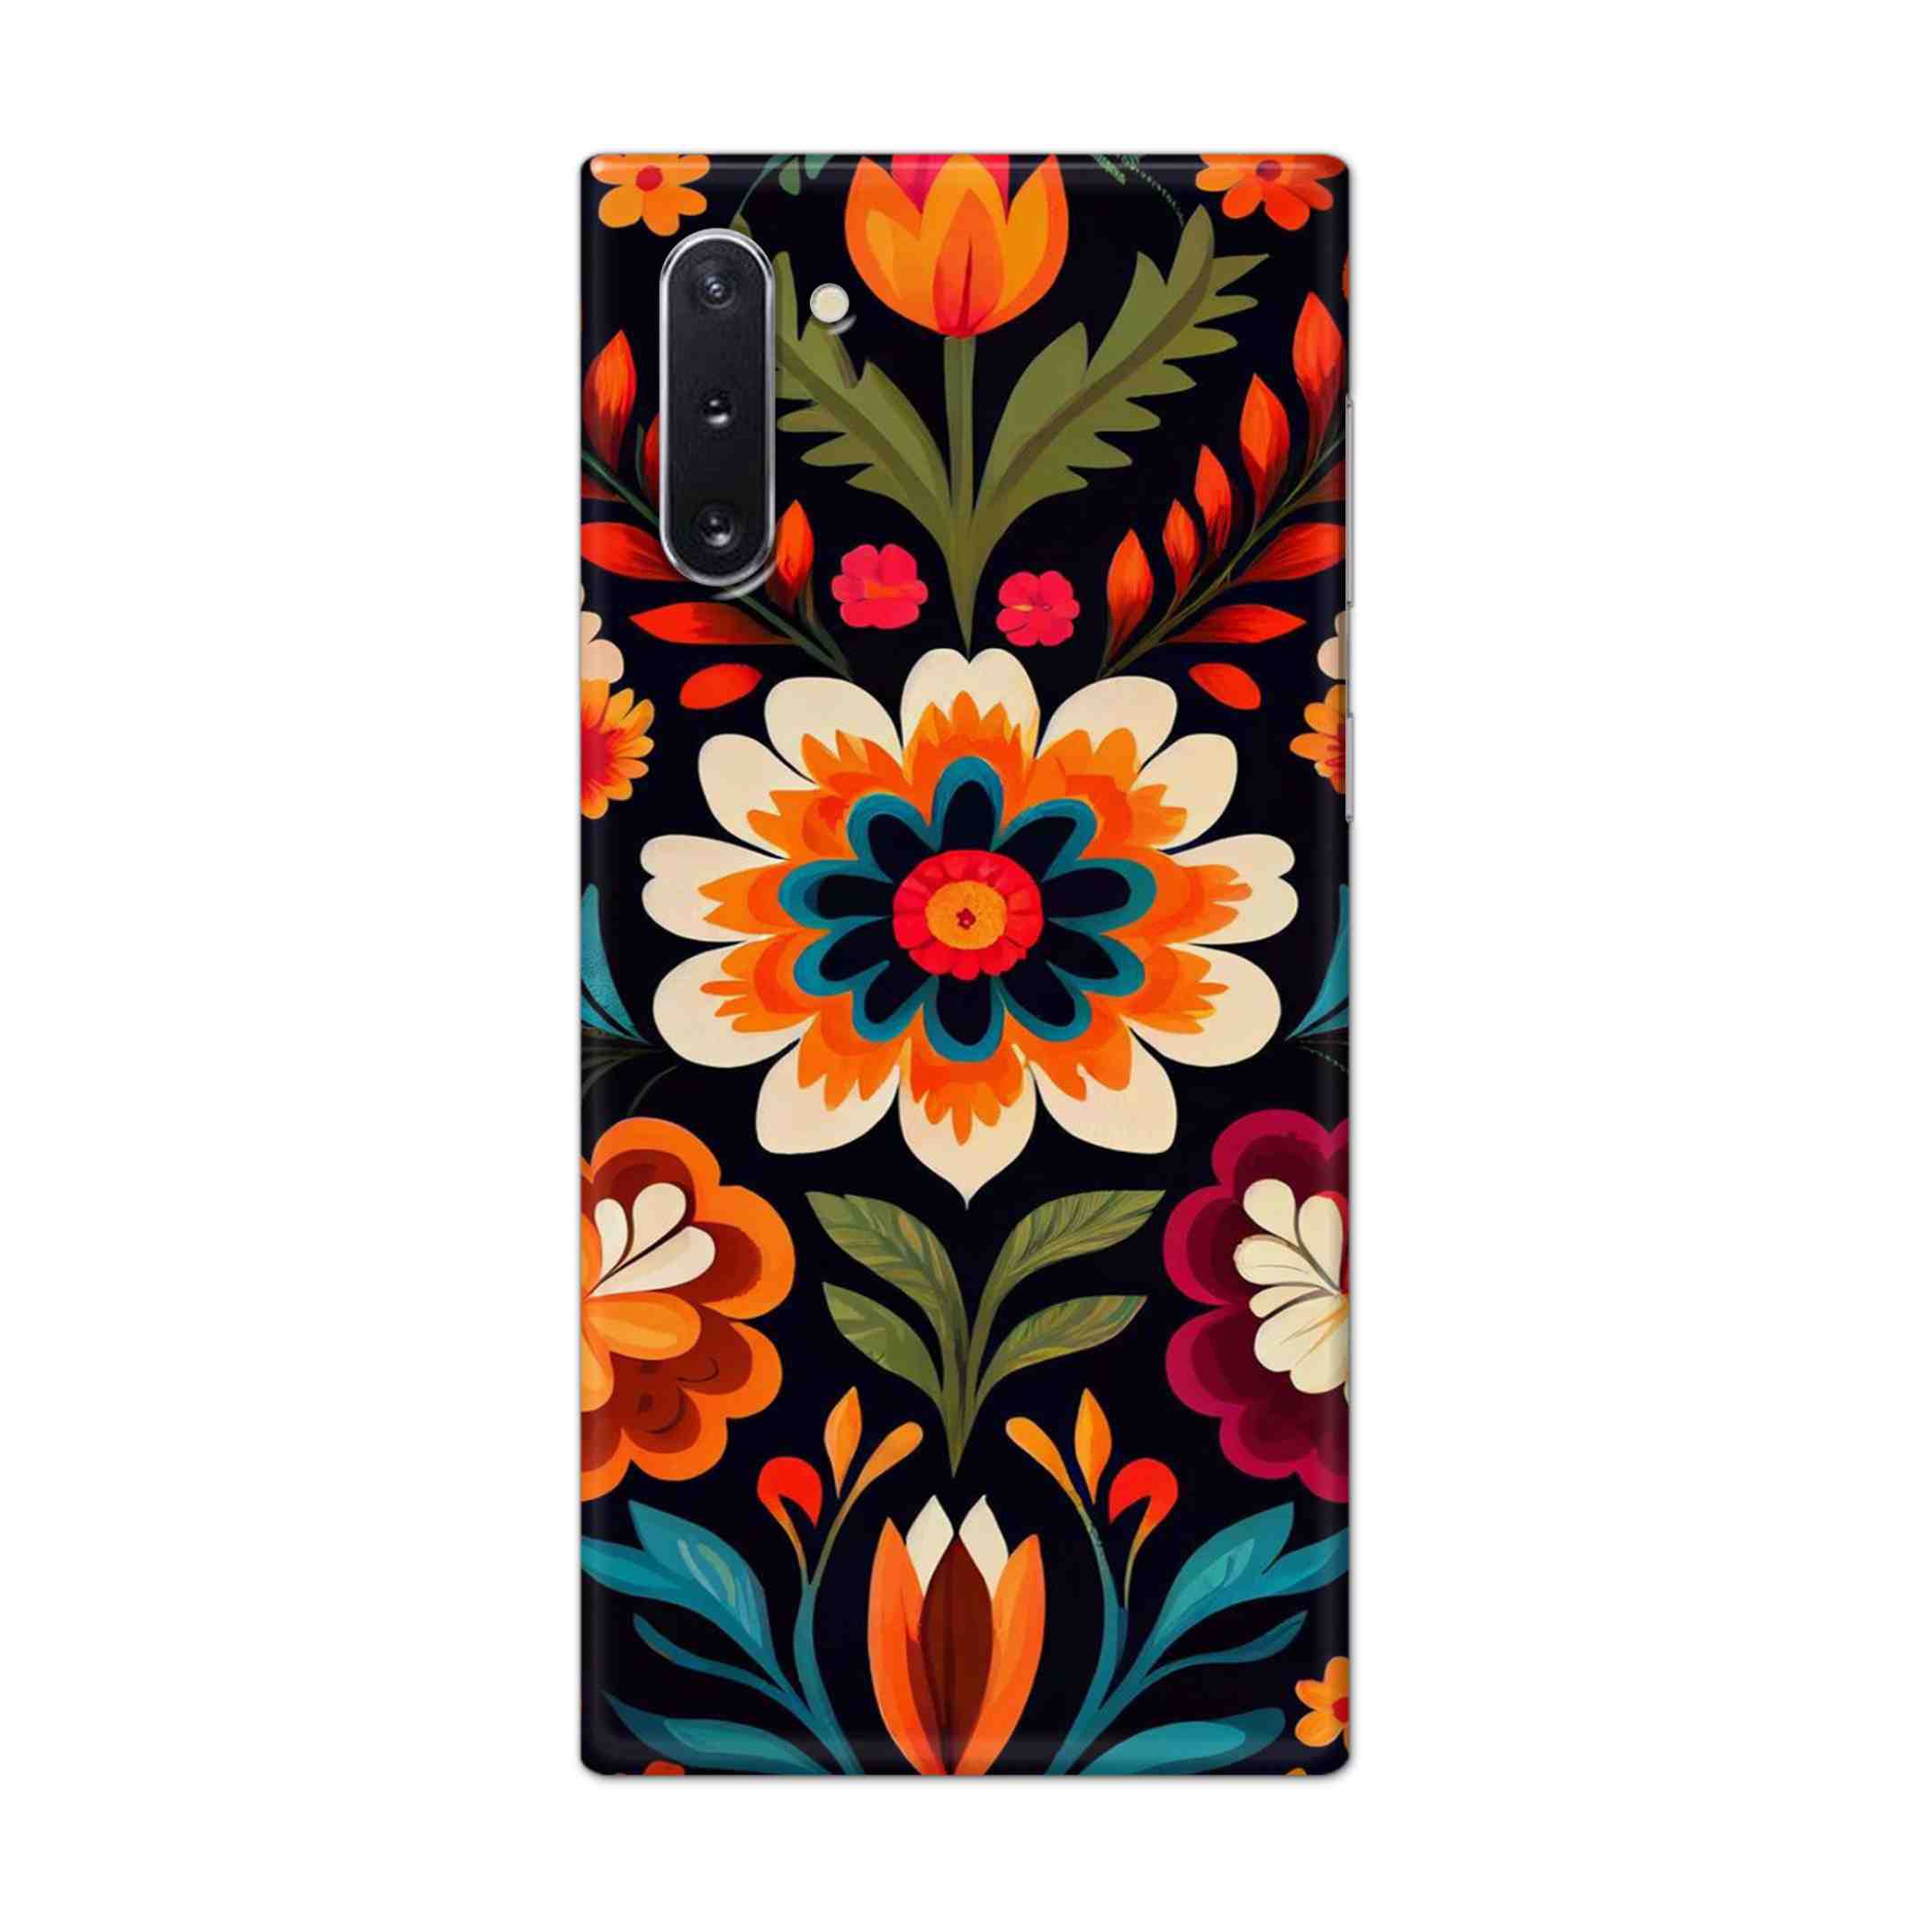 Buy Flower Hard Back Mobile Phone Case Cover For Samsung Galaxy Note 10 Online